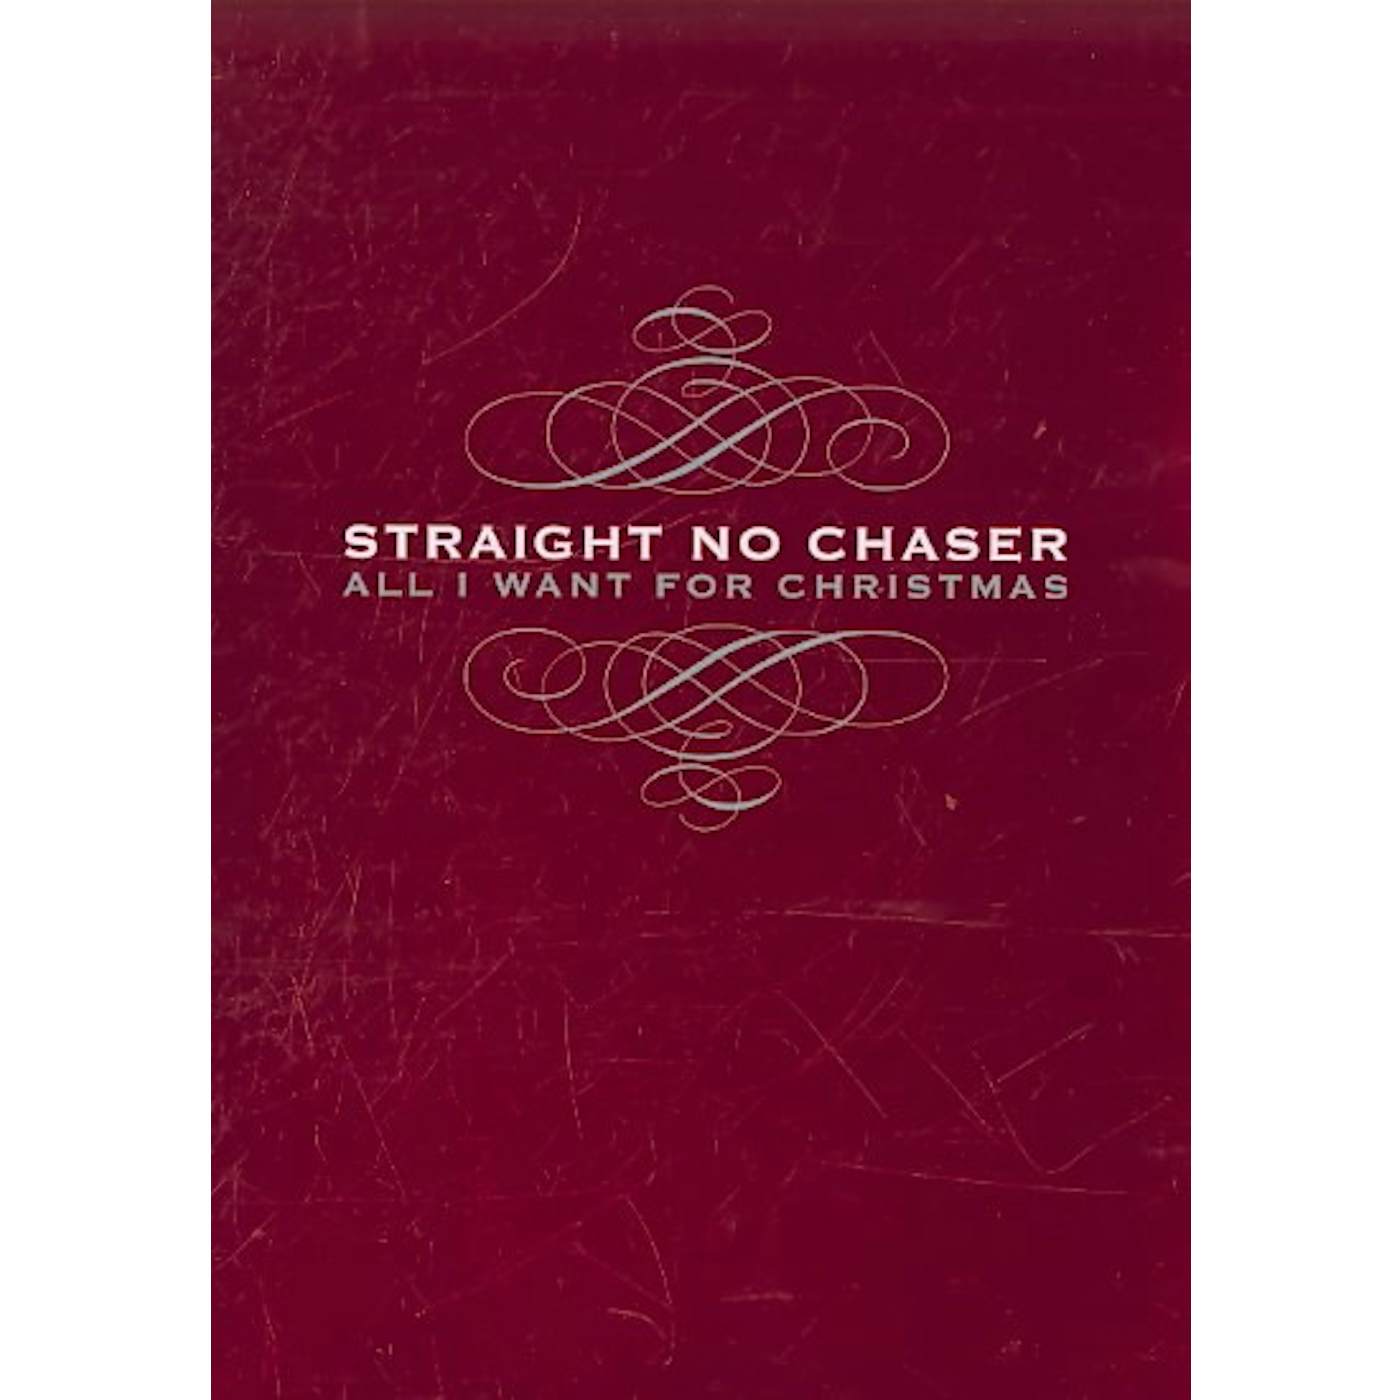 Straight No Chaser All I Want for Christmas CD